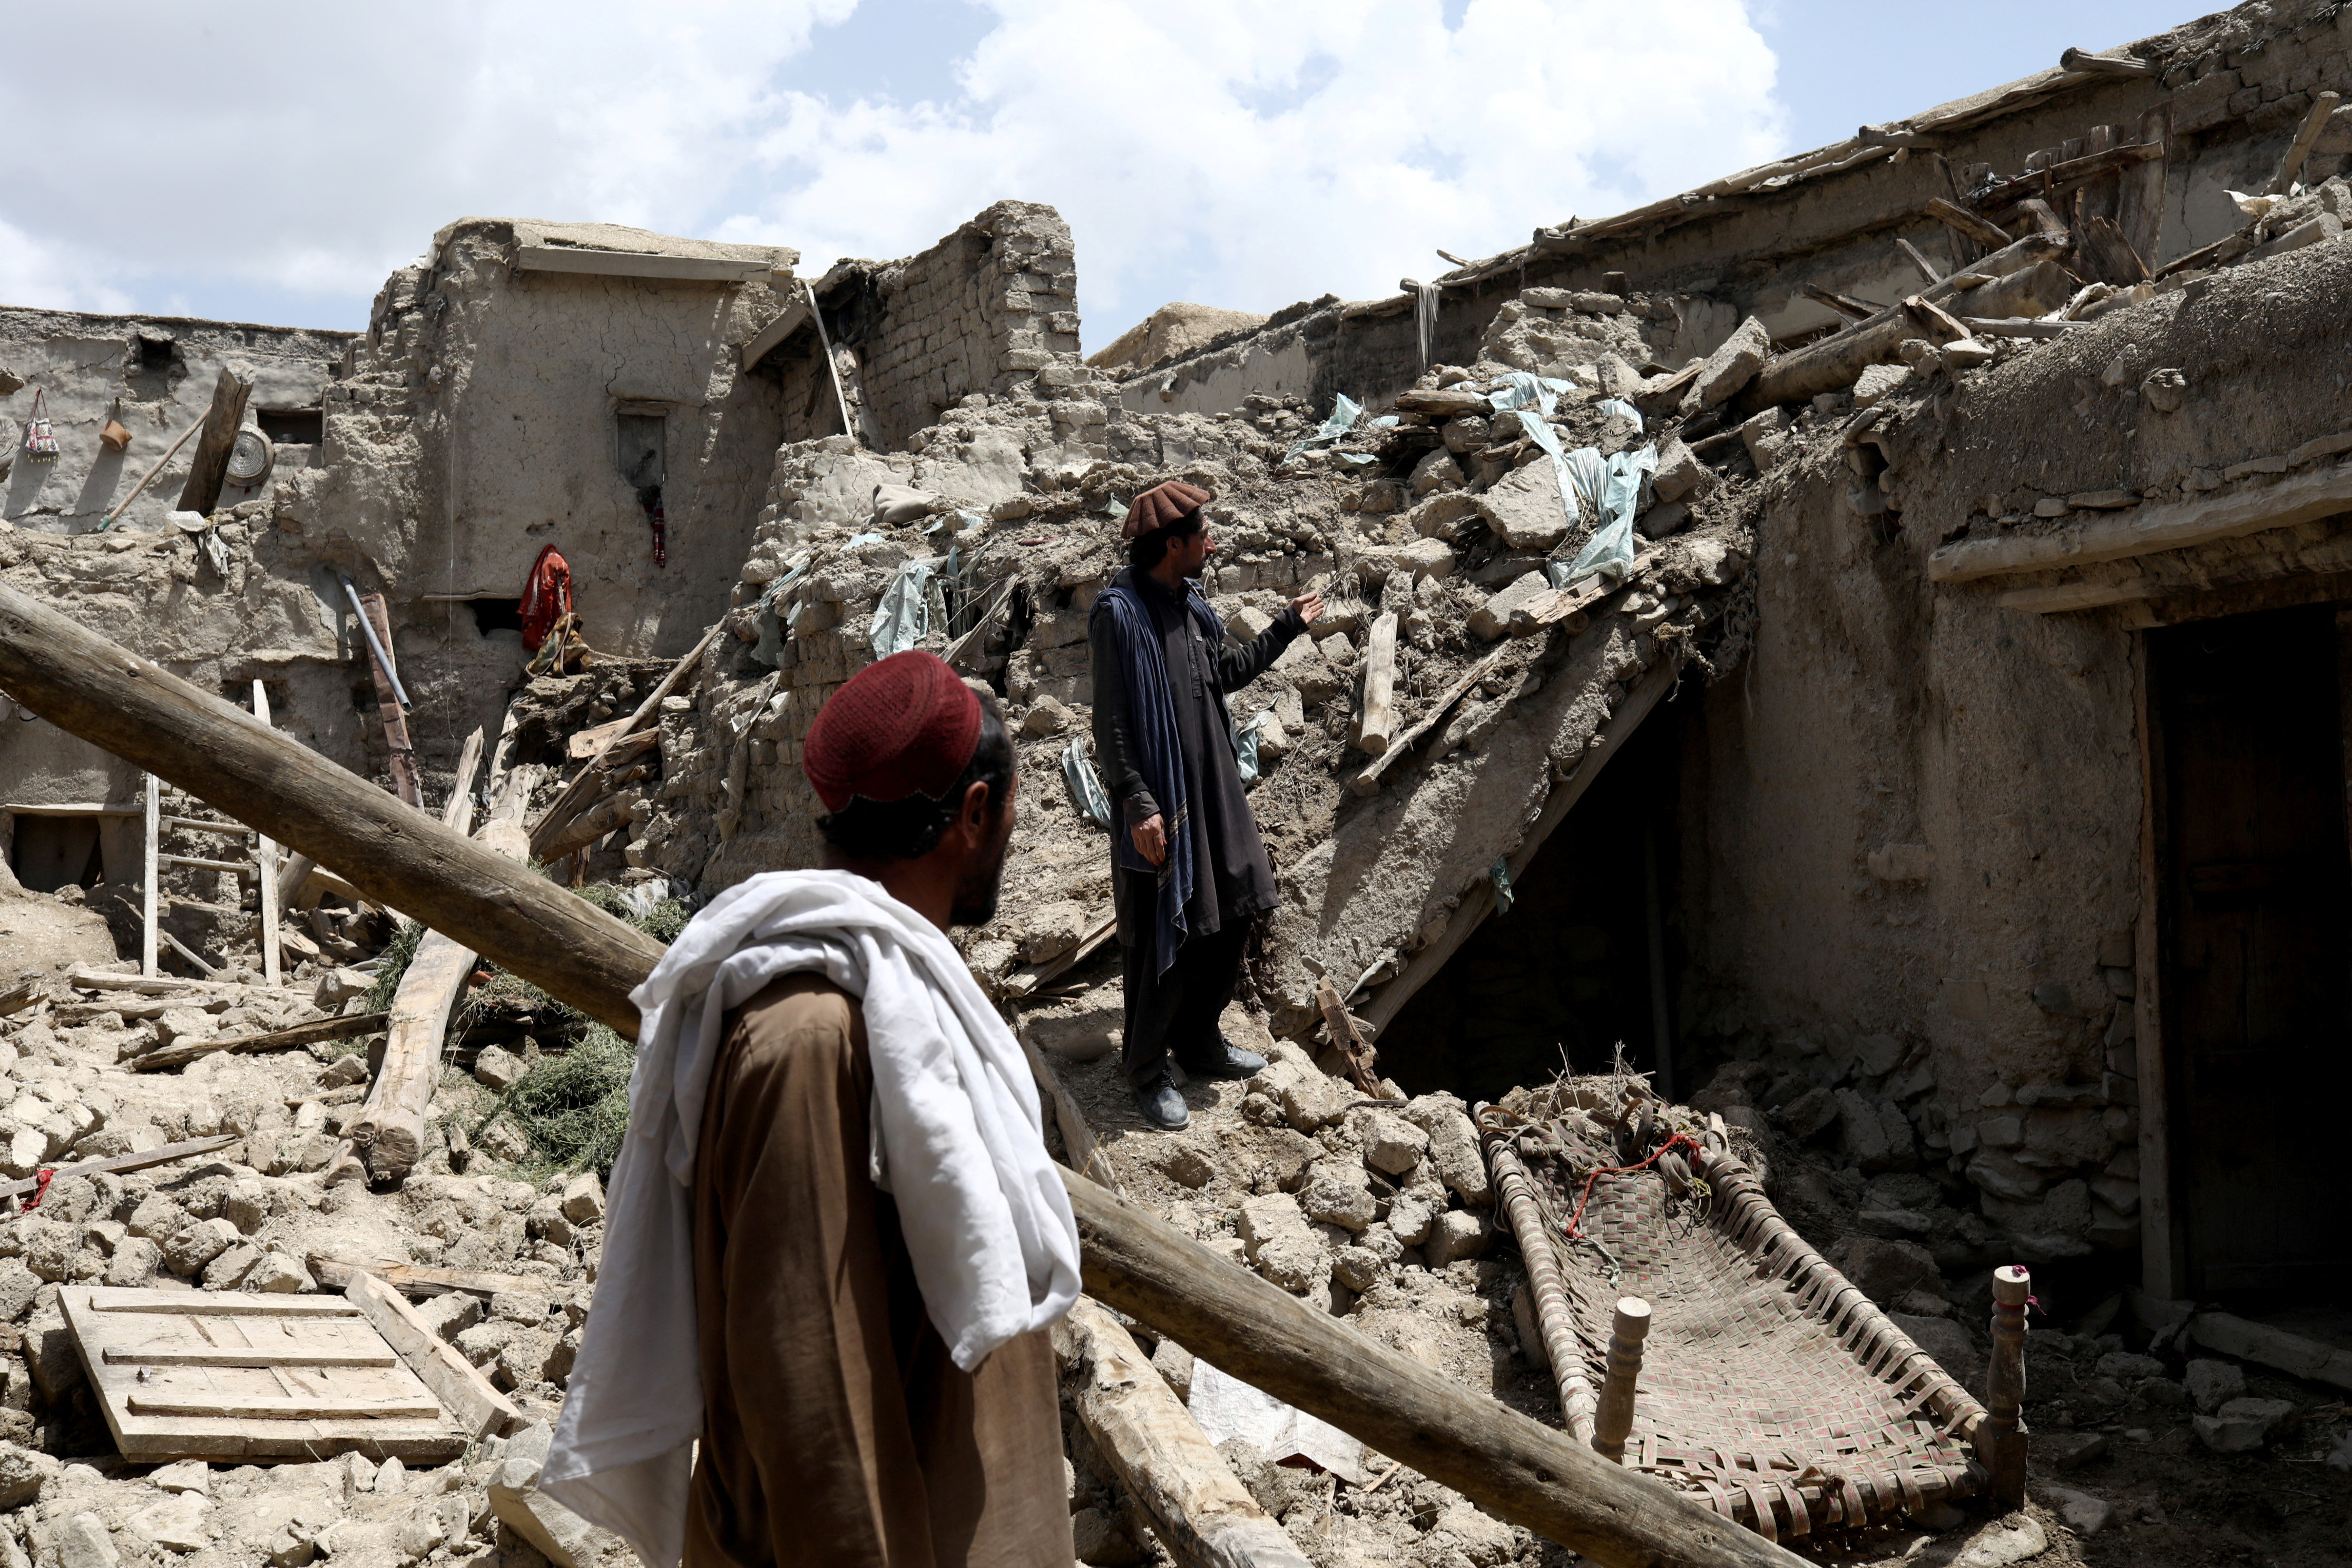 Afghan men stand on the debris of a house that was destroyed by an earthquake in Gayan